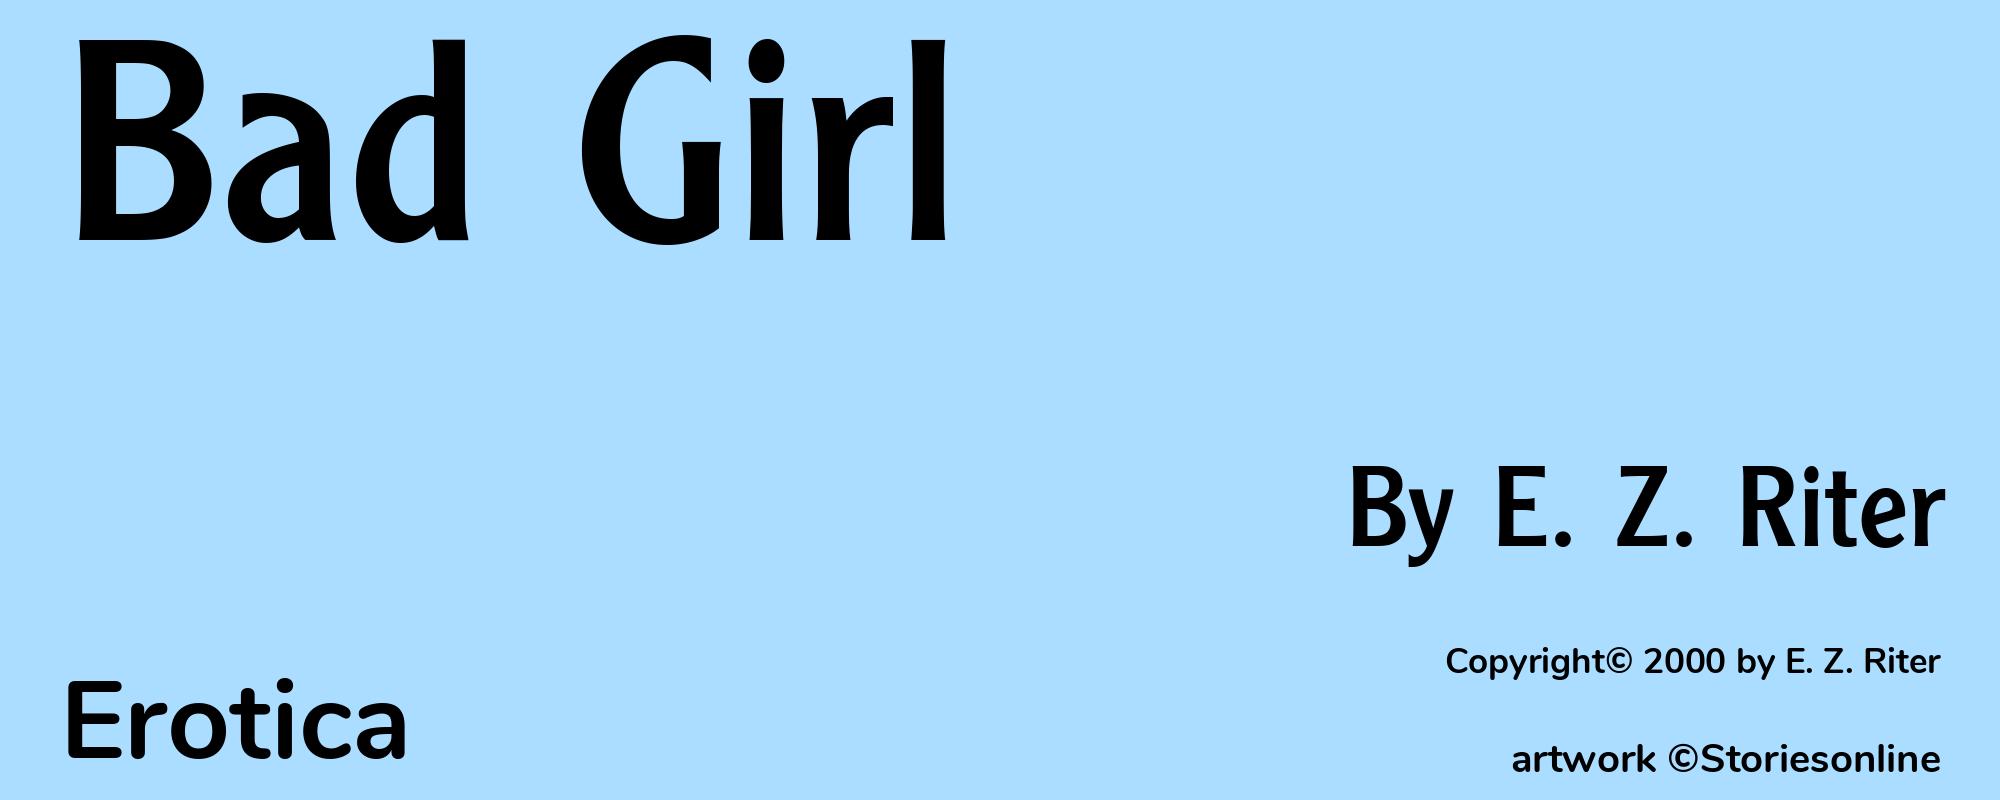 Bad Girl - Cover